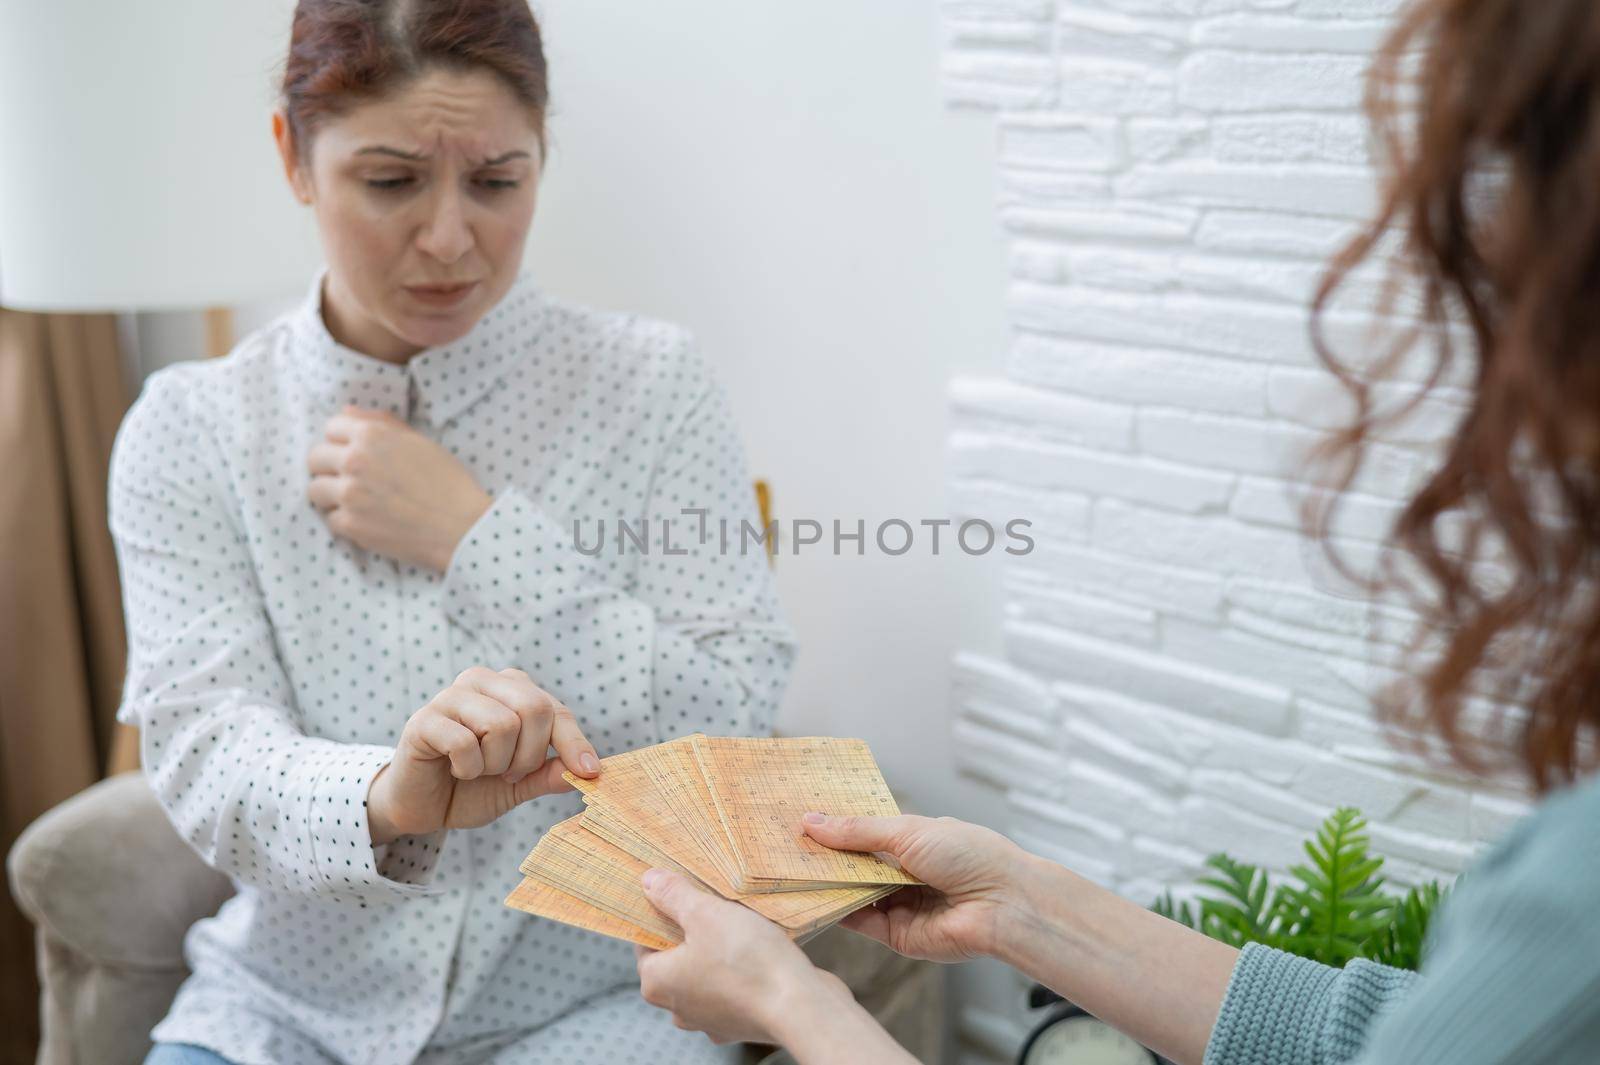 Psychologist uses metaphorical associative cards in a session with a patient